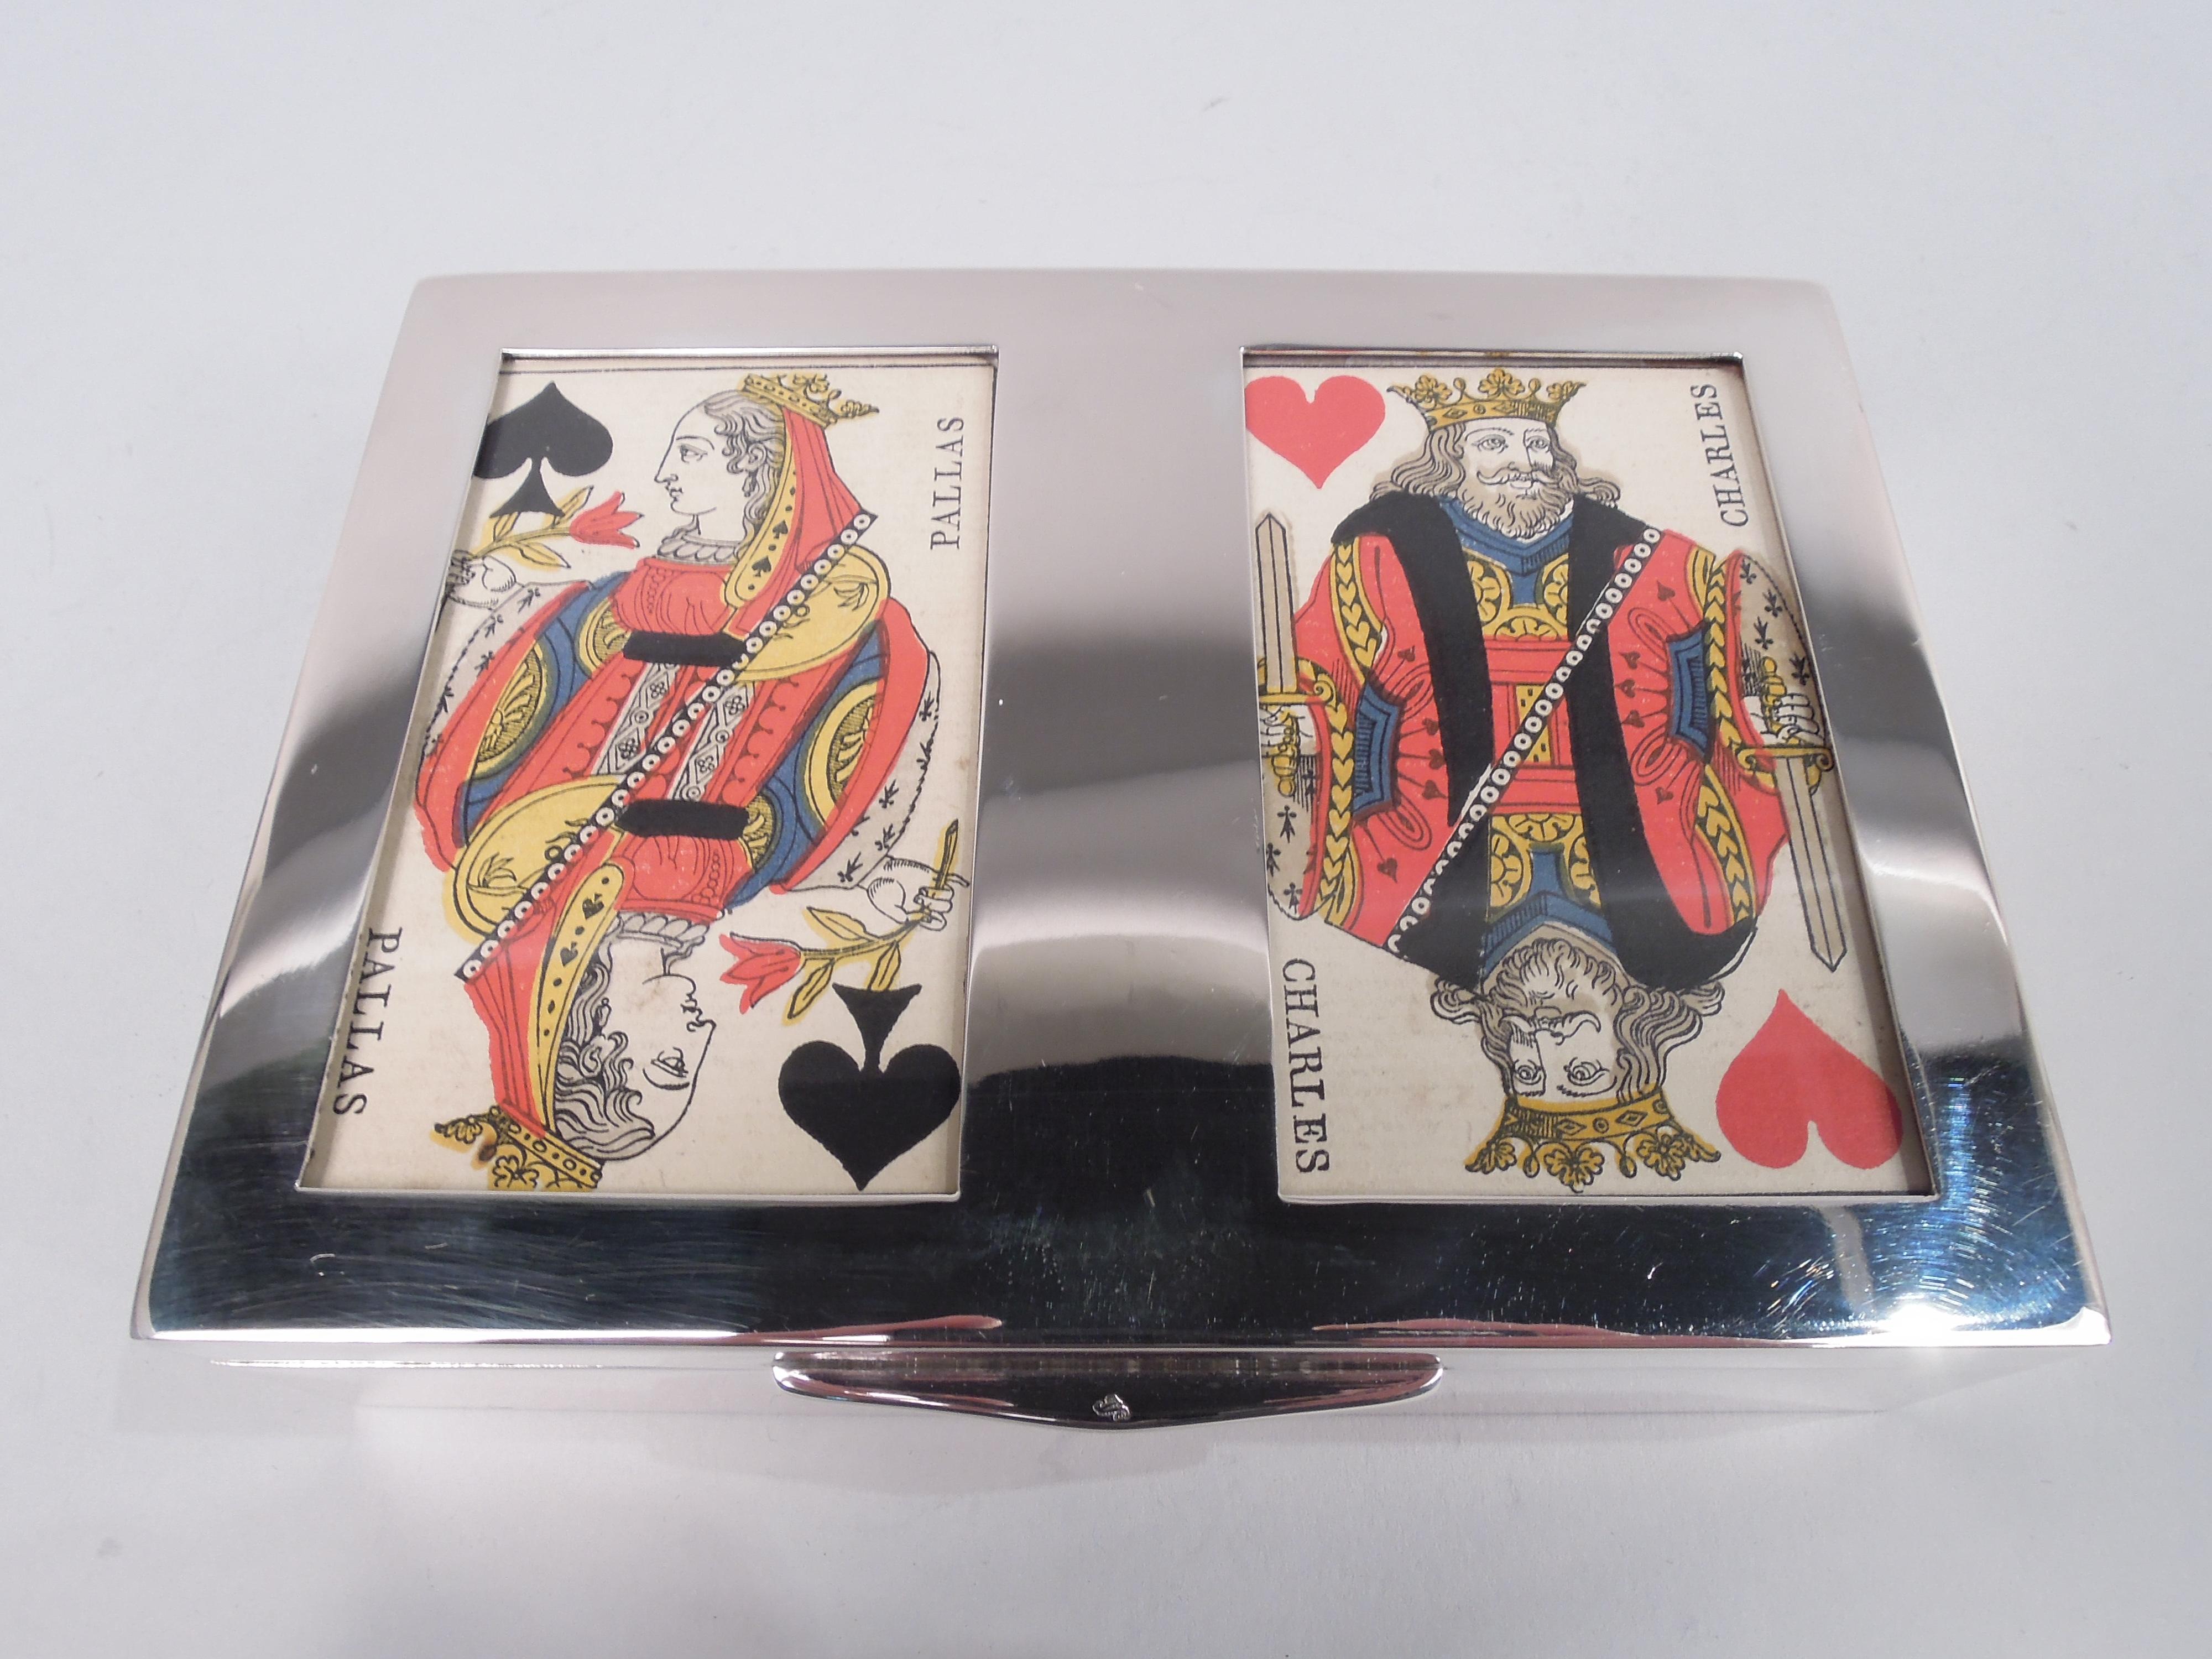 German 800 silver playing card box, ca 1920. Rectangular with straight sides. Cover hinged with chamfered tab; top flat with two glazed windows faced with a King of Hearts and Queen of Spades. Interior wood-lined and partitioned with ribbon tabs.